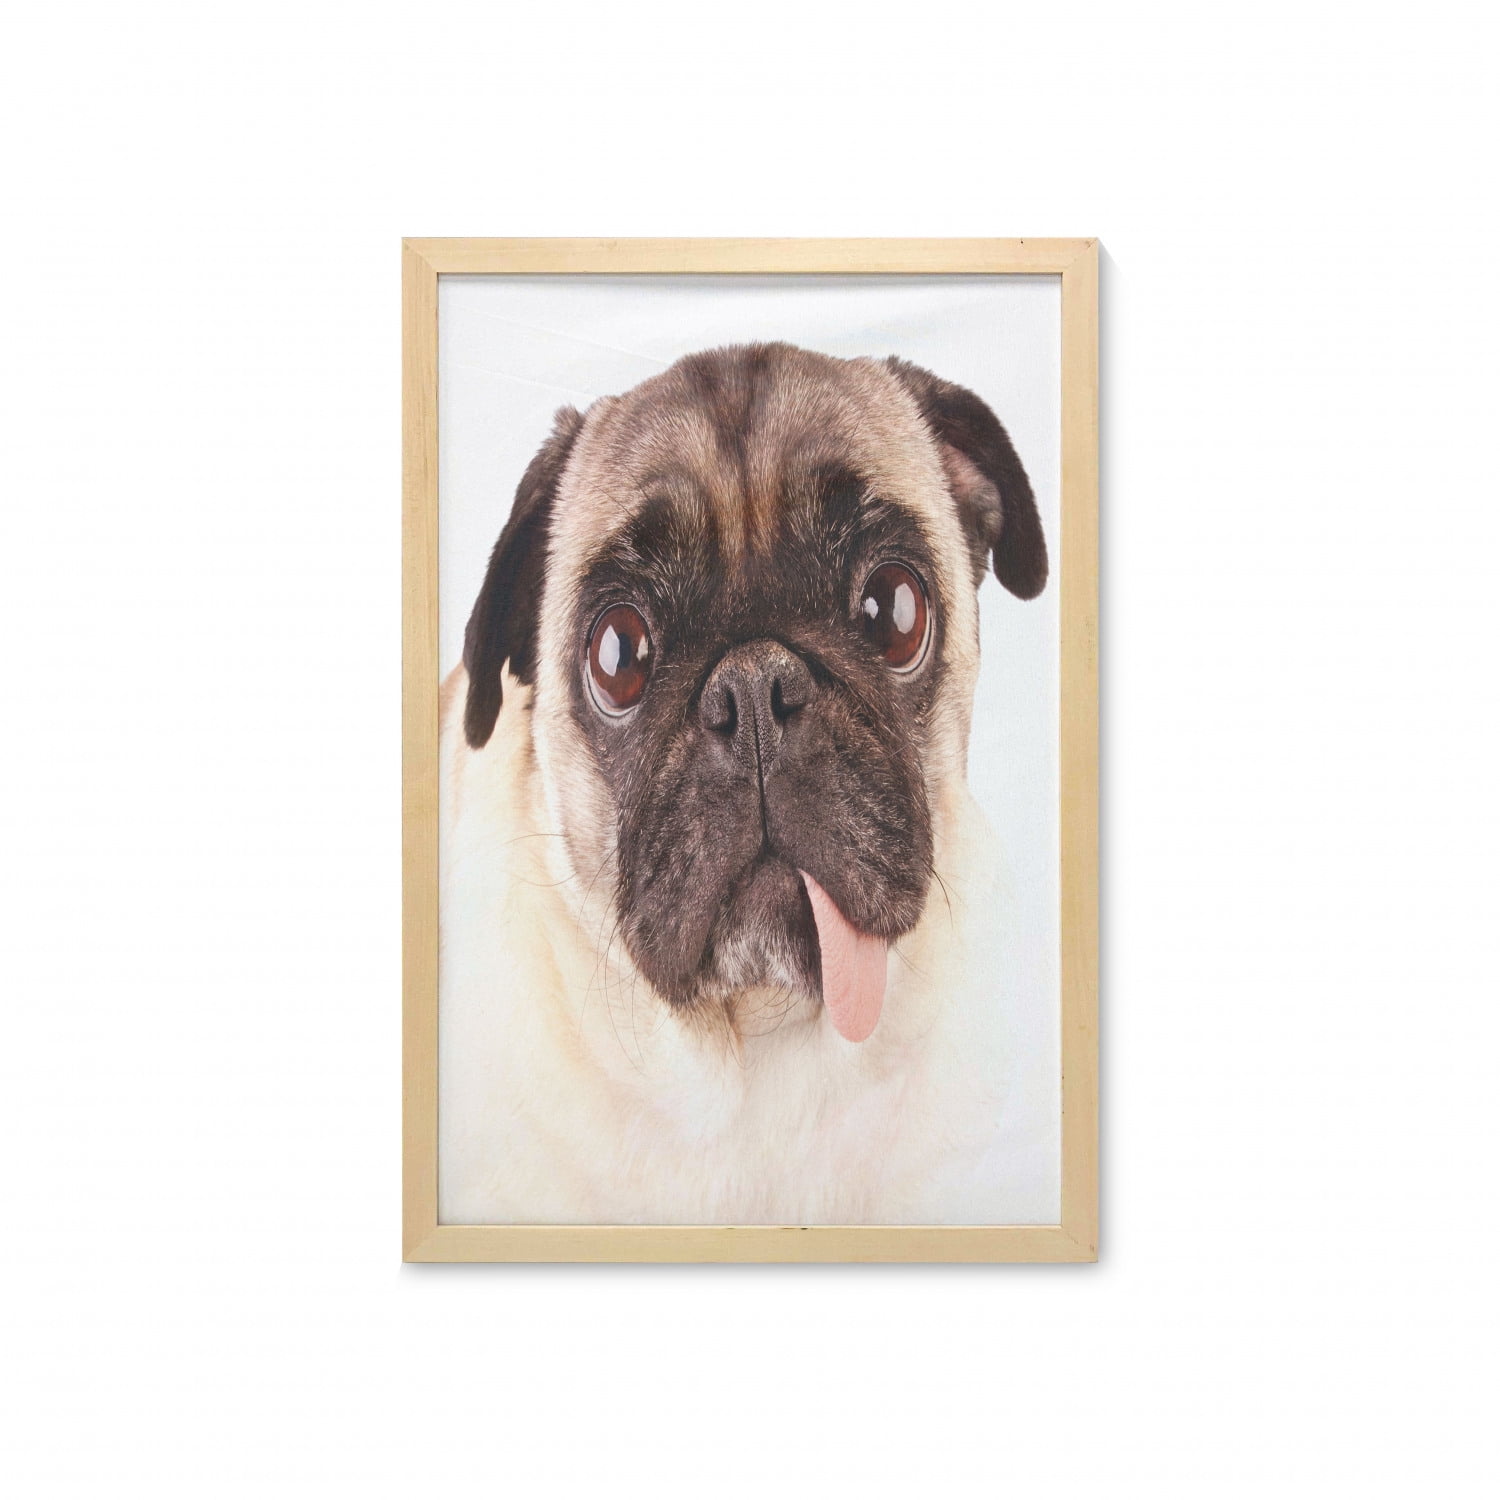 Dogs Pugs Painting Brown Black Art Print Framed Poster 14x20 inch 